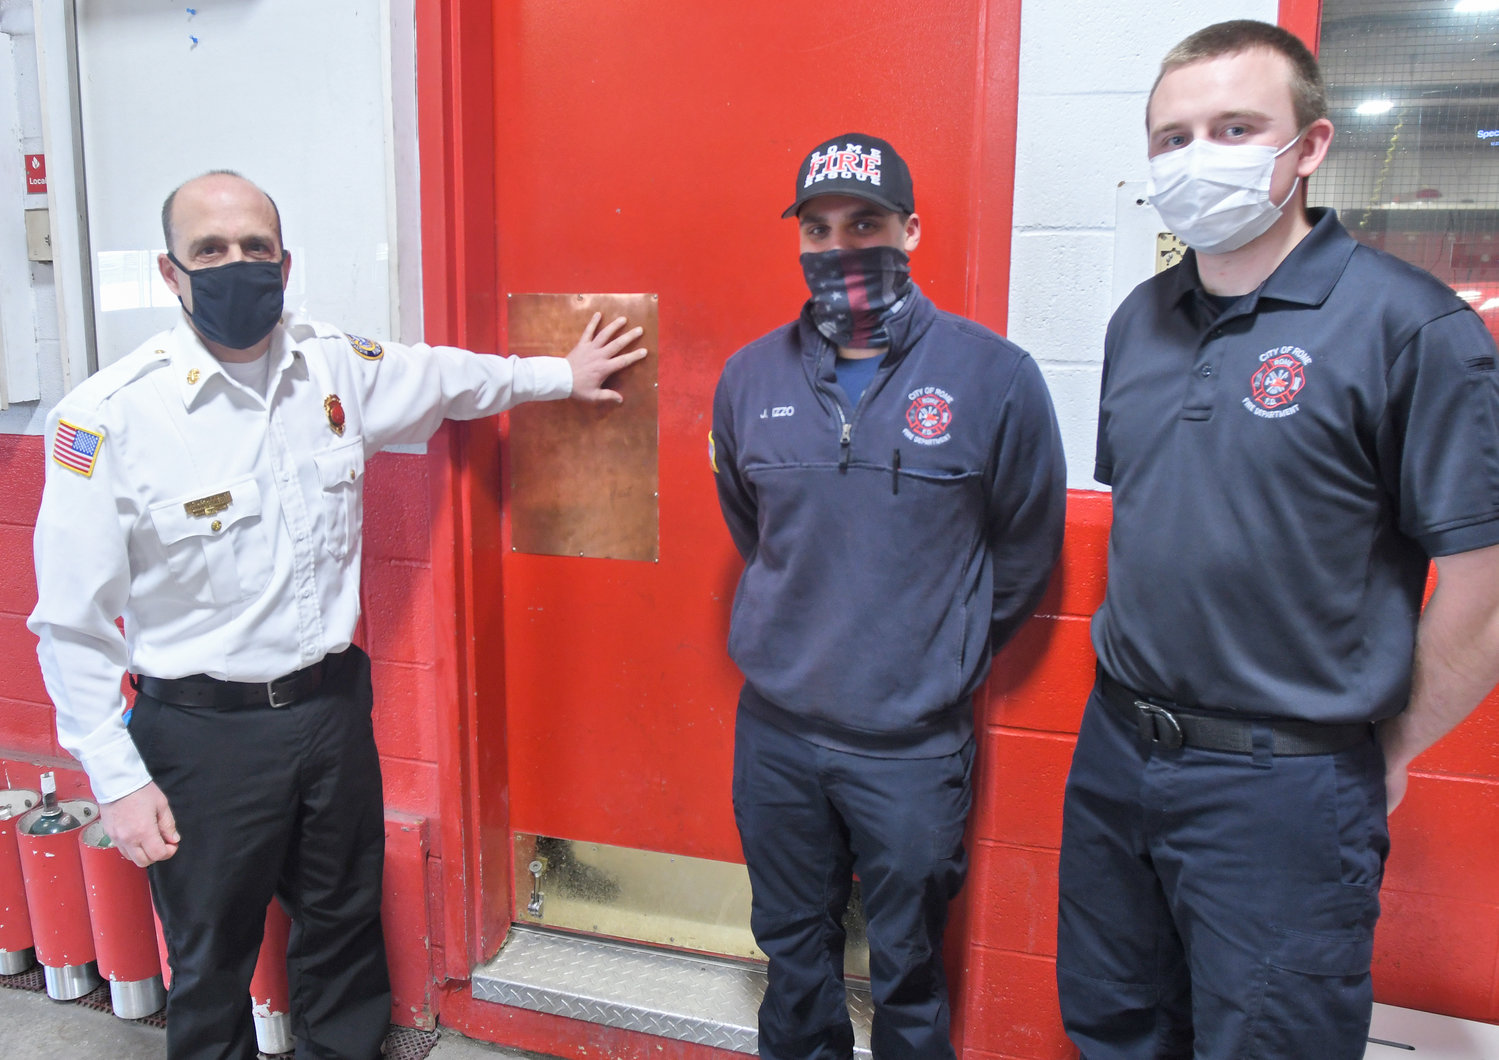 KEEPING COVID AT BAY — Rome Fire Deputy Chief David Gratch points out one of the newly installed copper pads on several doors at the Rome Fire Department in this February 2021 file photo. Revere Copper Products had donated sheets of copper, known for its antimicrobal properties, to the department to assist with its COVID-19 precautions.